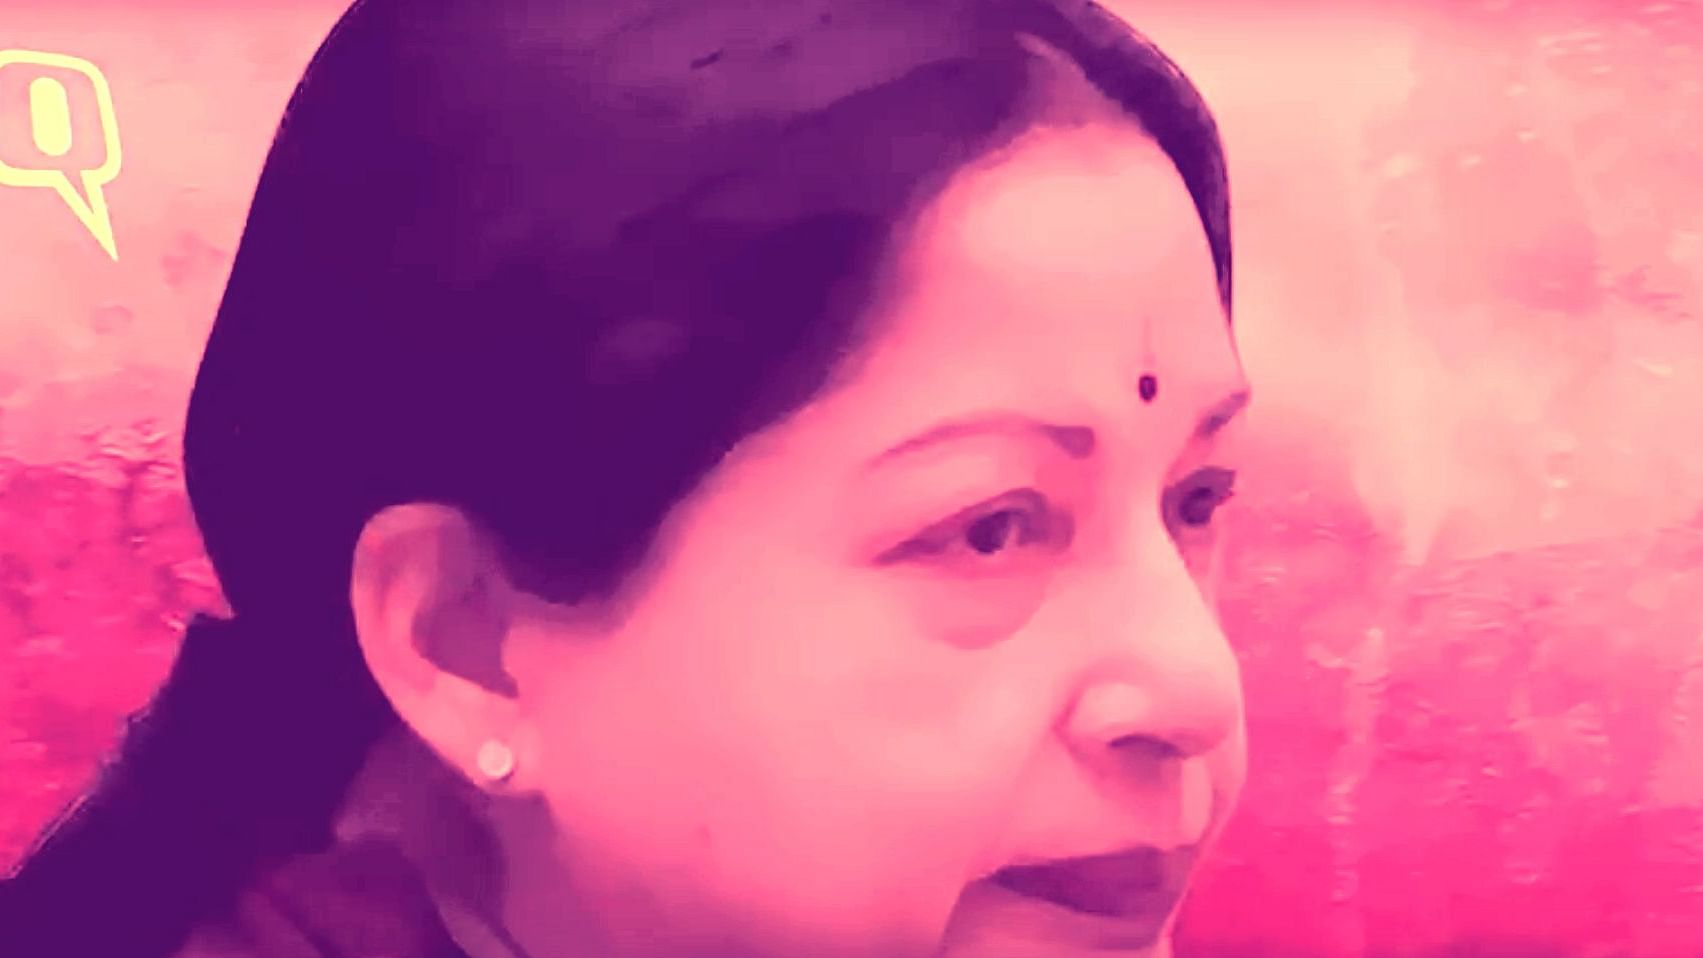 Jayalalithaa elicits extreme emotions. Contrary to popular belief, she felt them too.